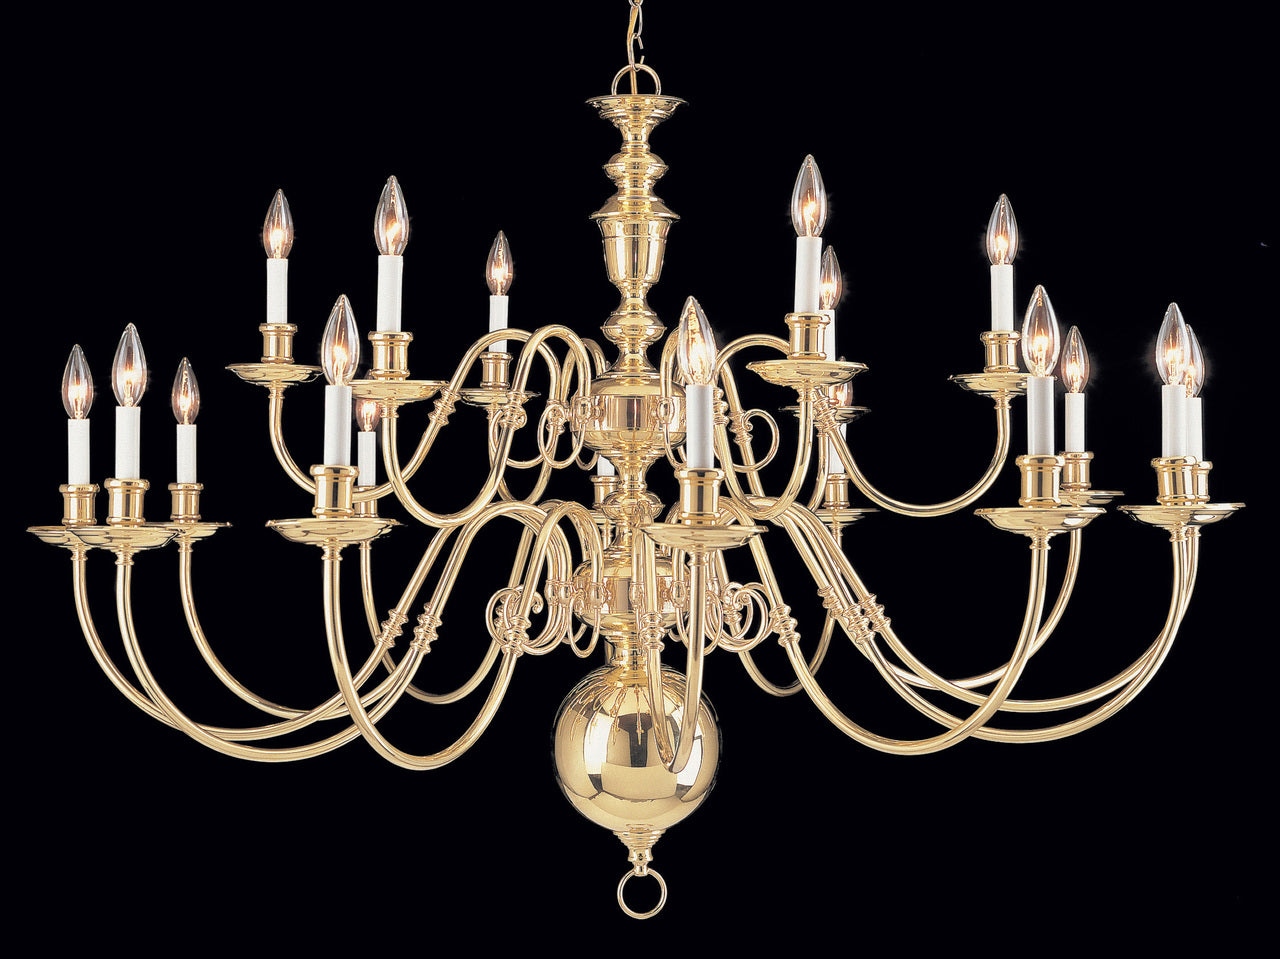 Classic Lighting 6736 Jamestown Traditional Chandelier in Polished Brass